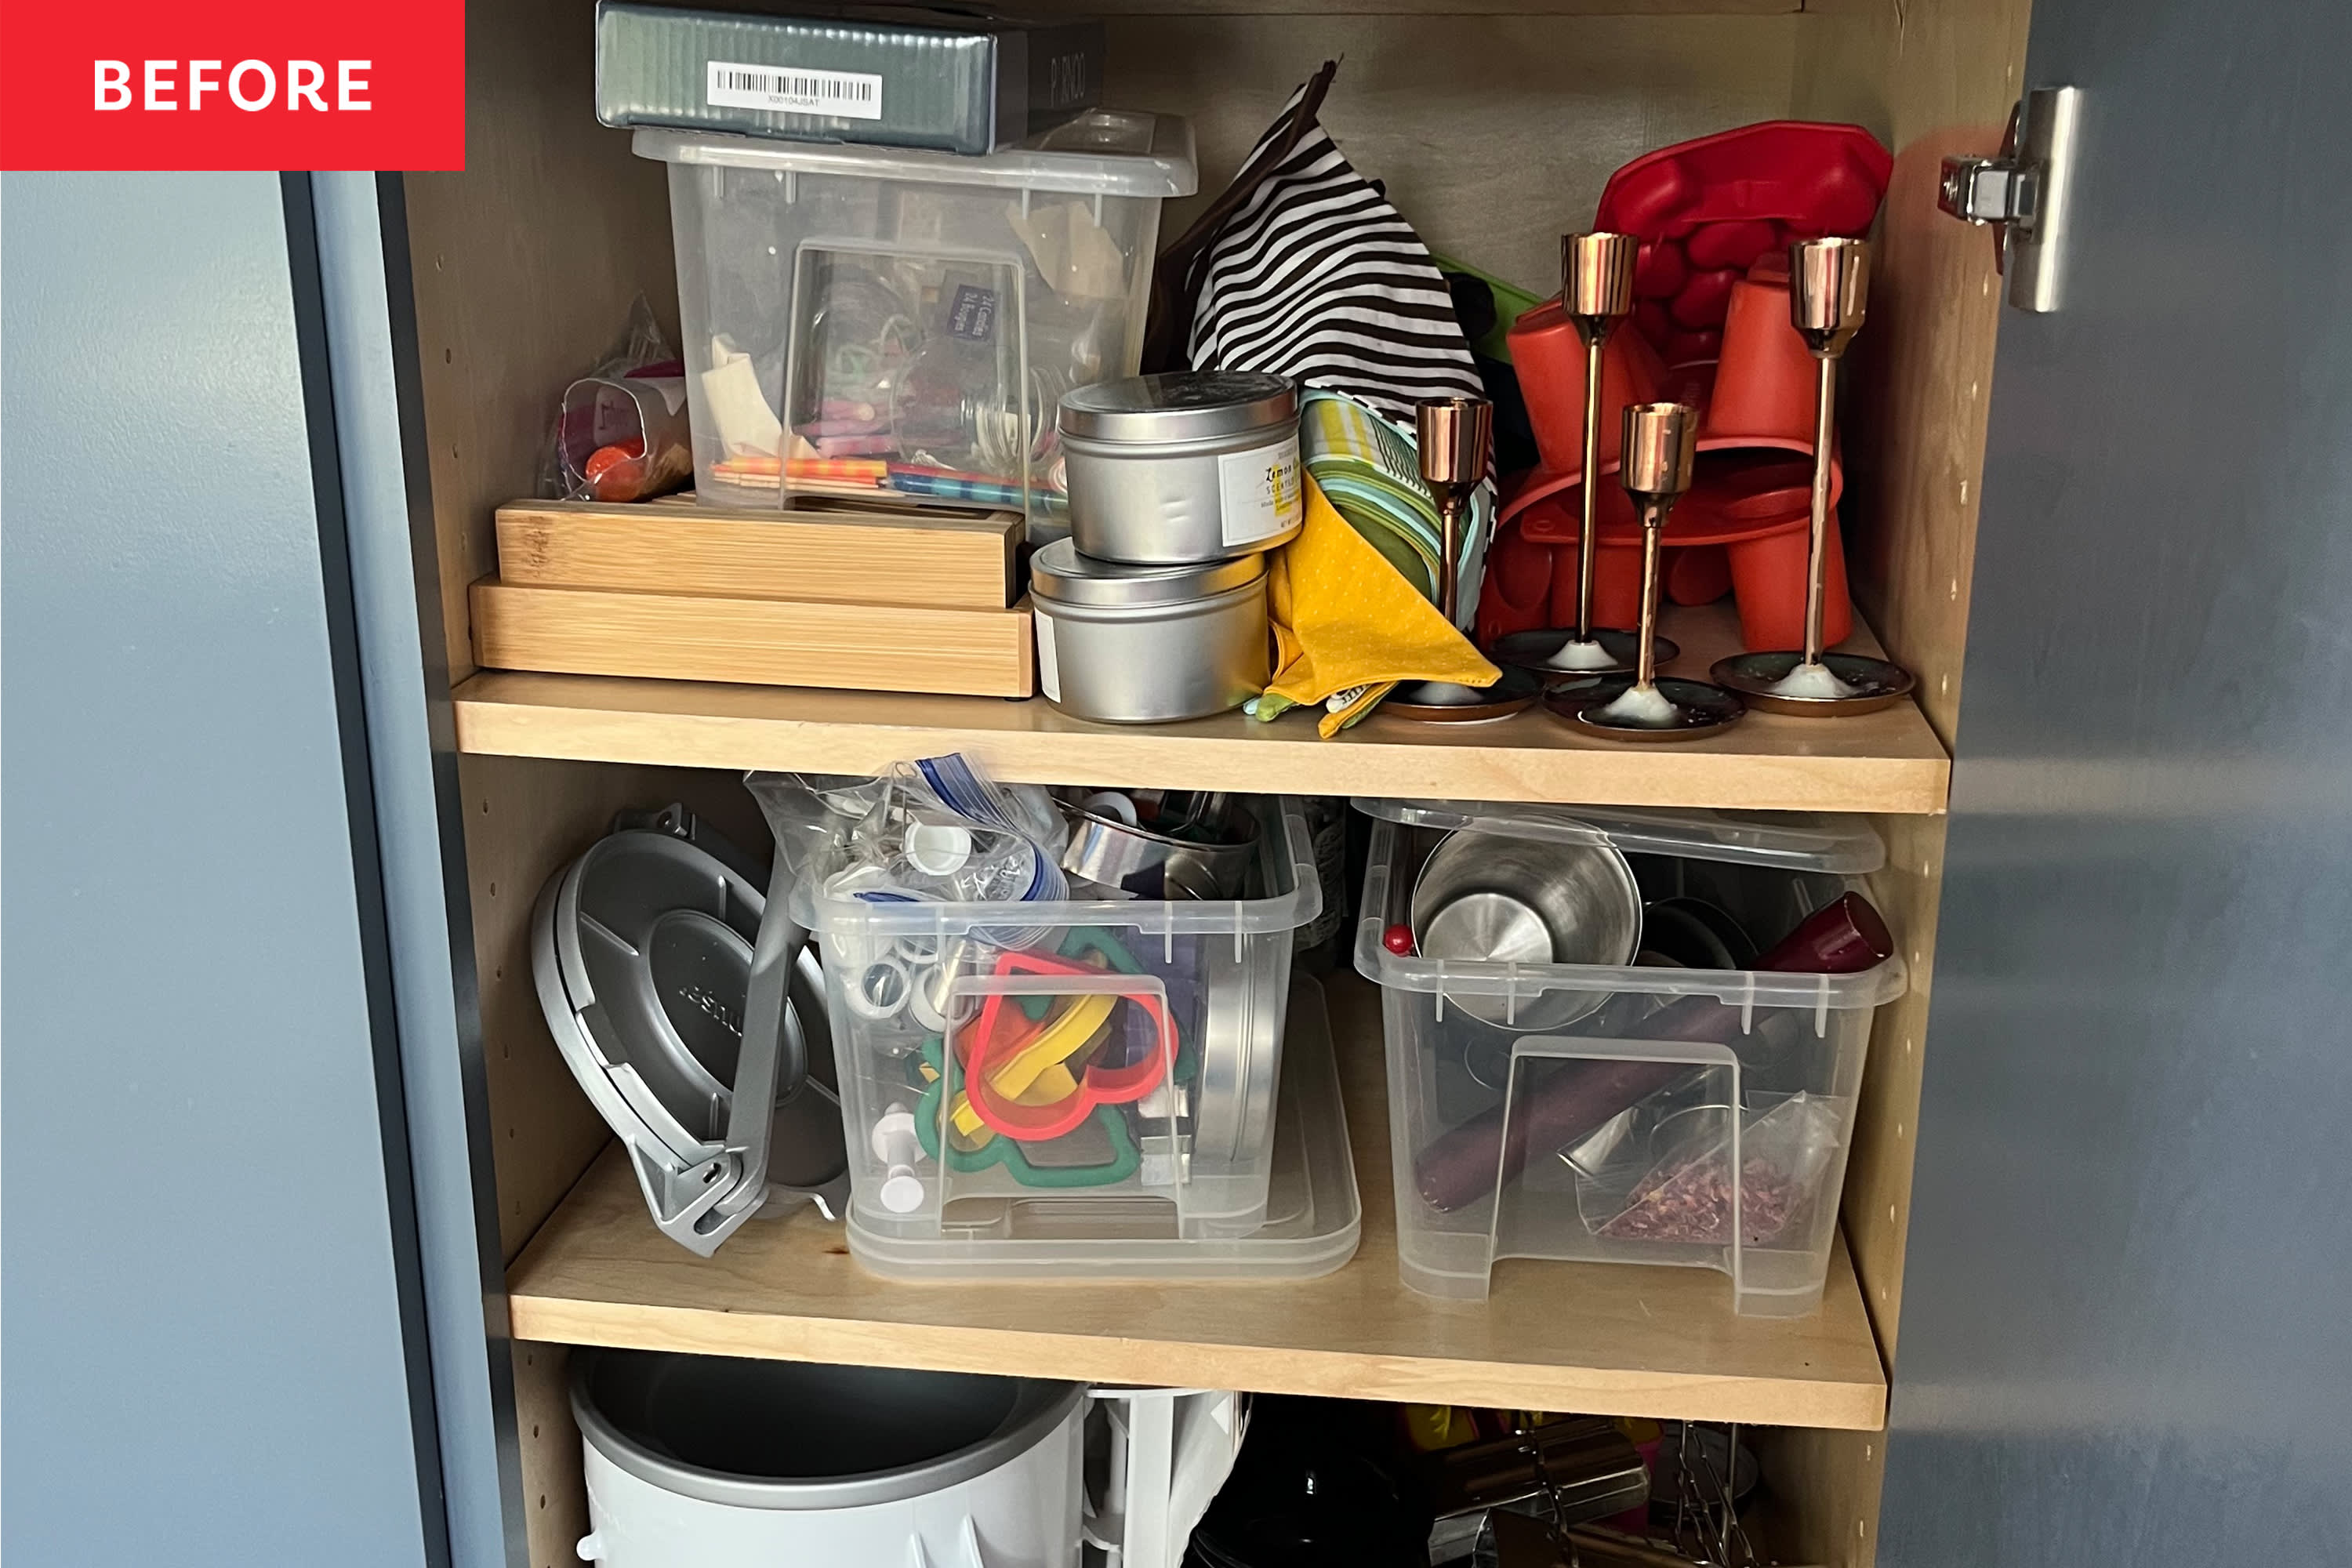 Top 5 Kitchen Cupboard Storage Ideas: Say Goodbye To Clutter